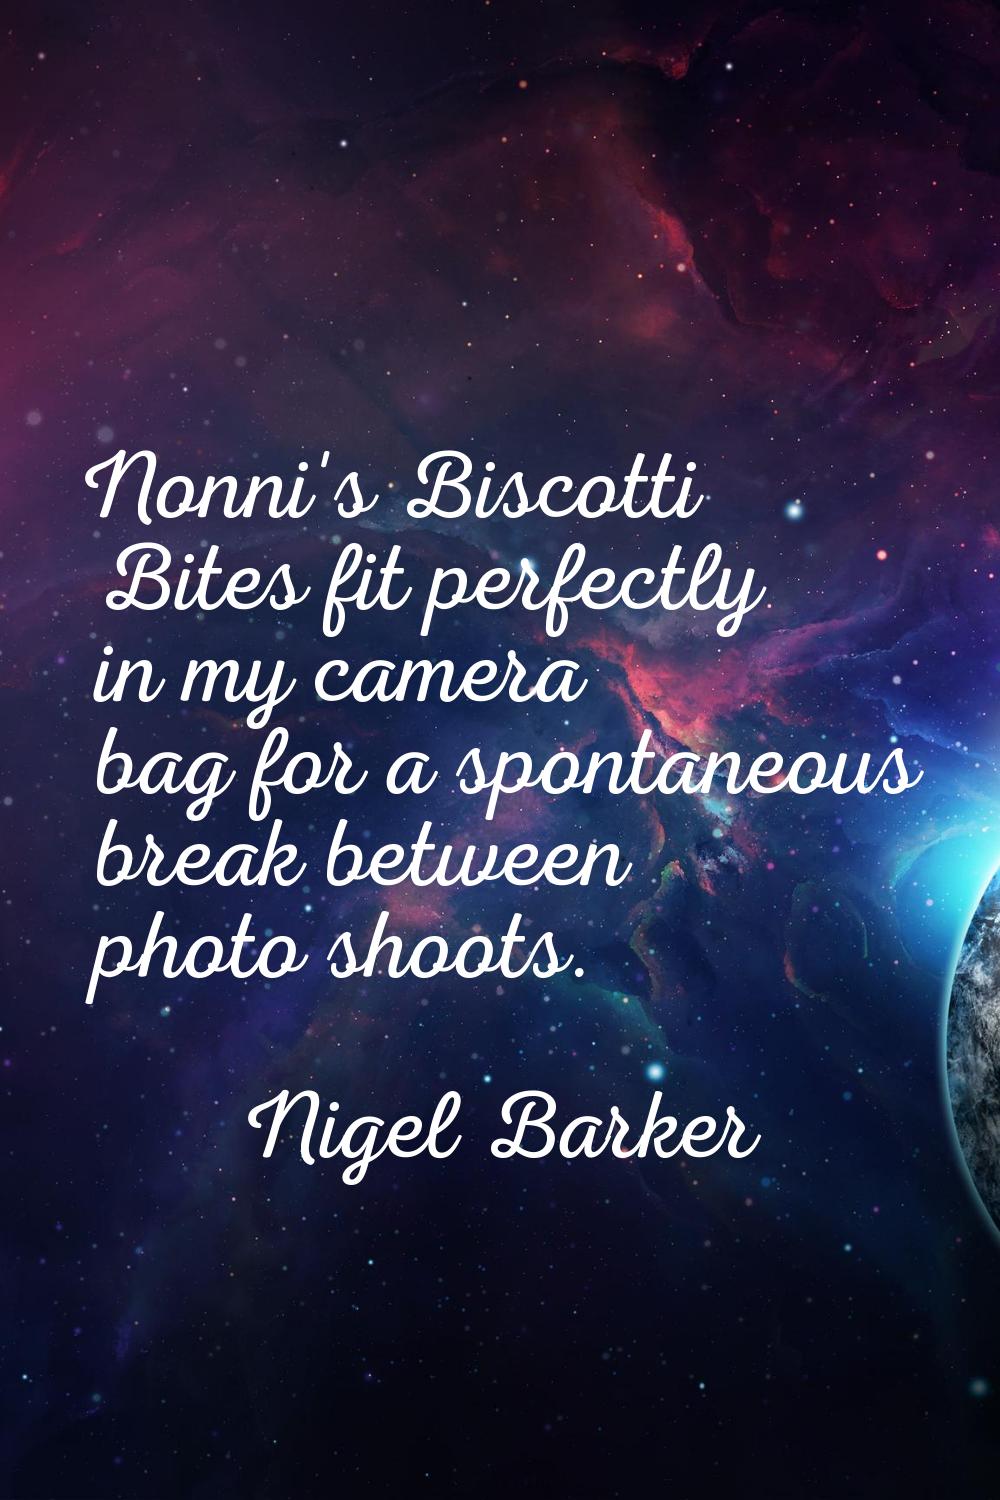 Nonni's Biscotti Bites fit perfectly in my camera bag for a spontaneous break between photo shoots.